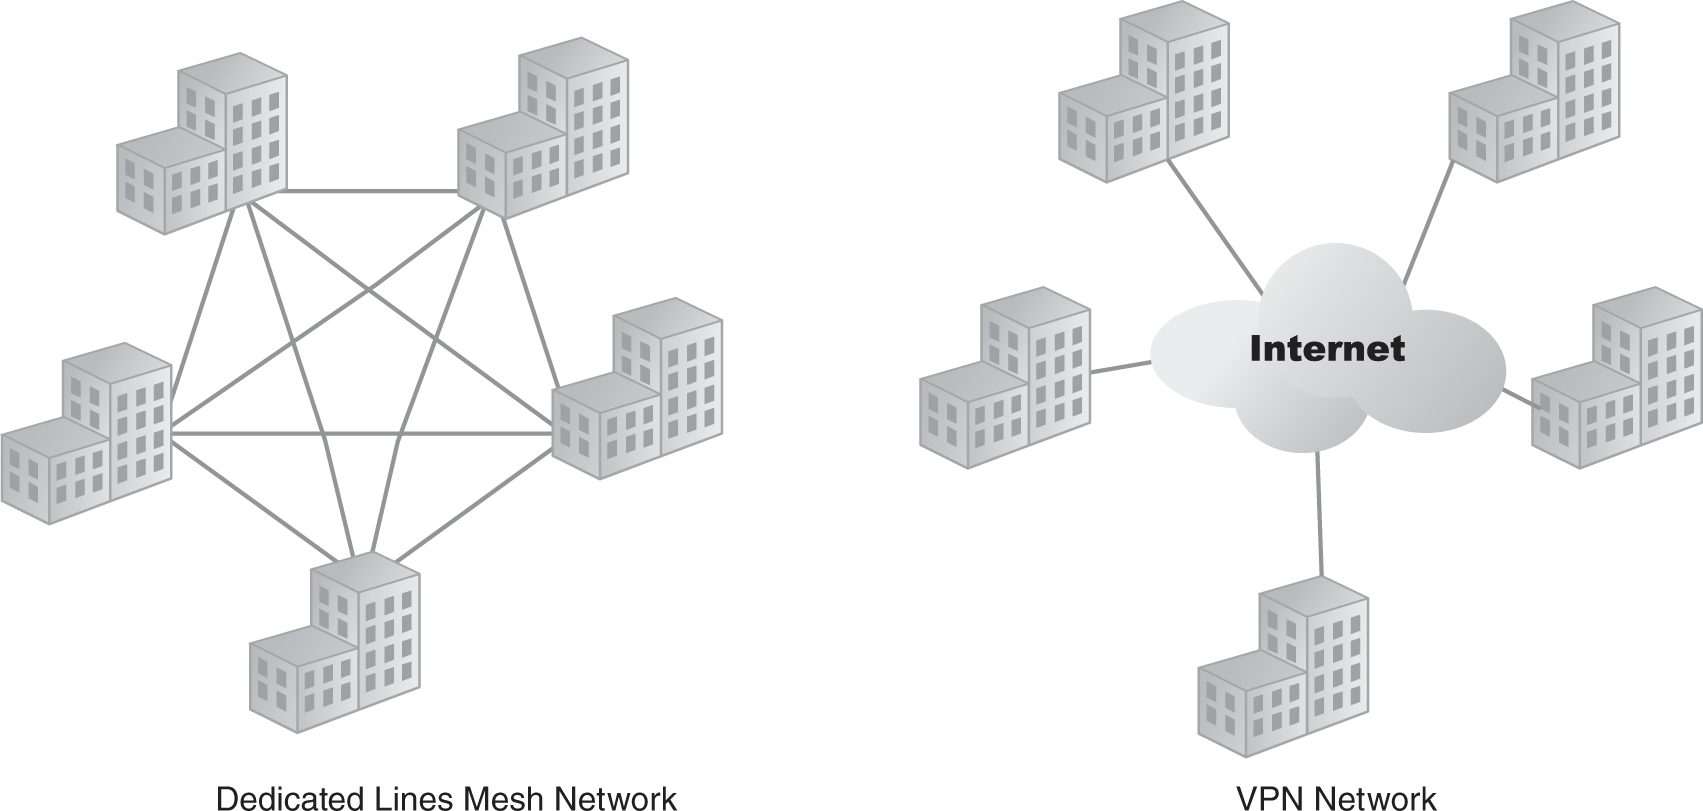 Two diagrams illustrate a corporate network using dedicated leased lines and V P Ns over the internet.